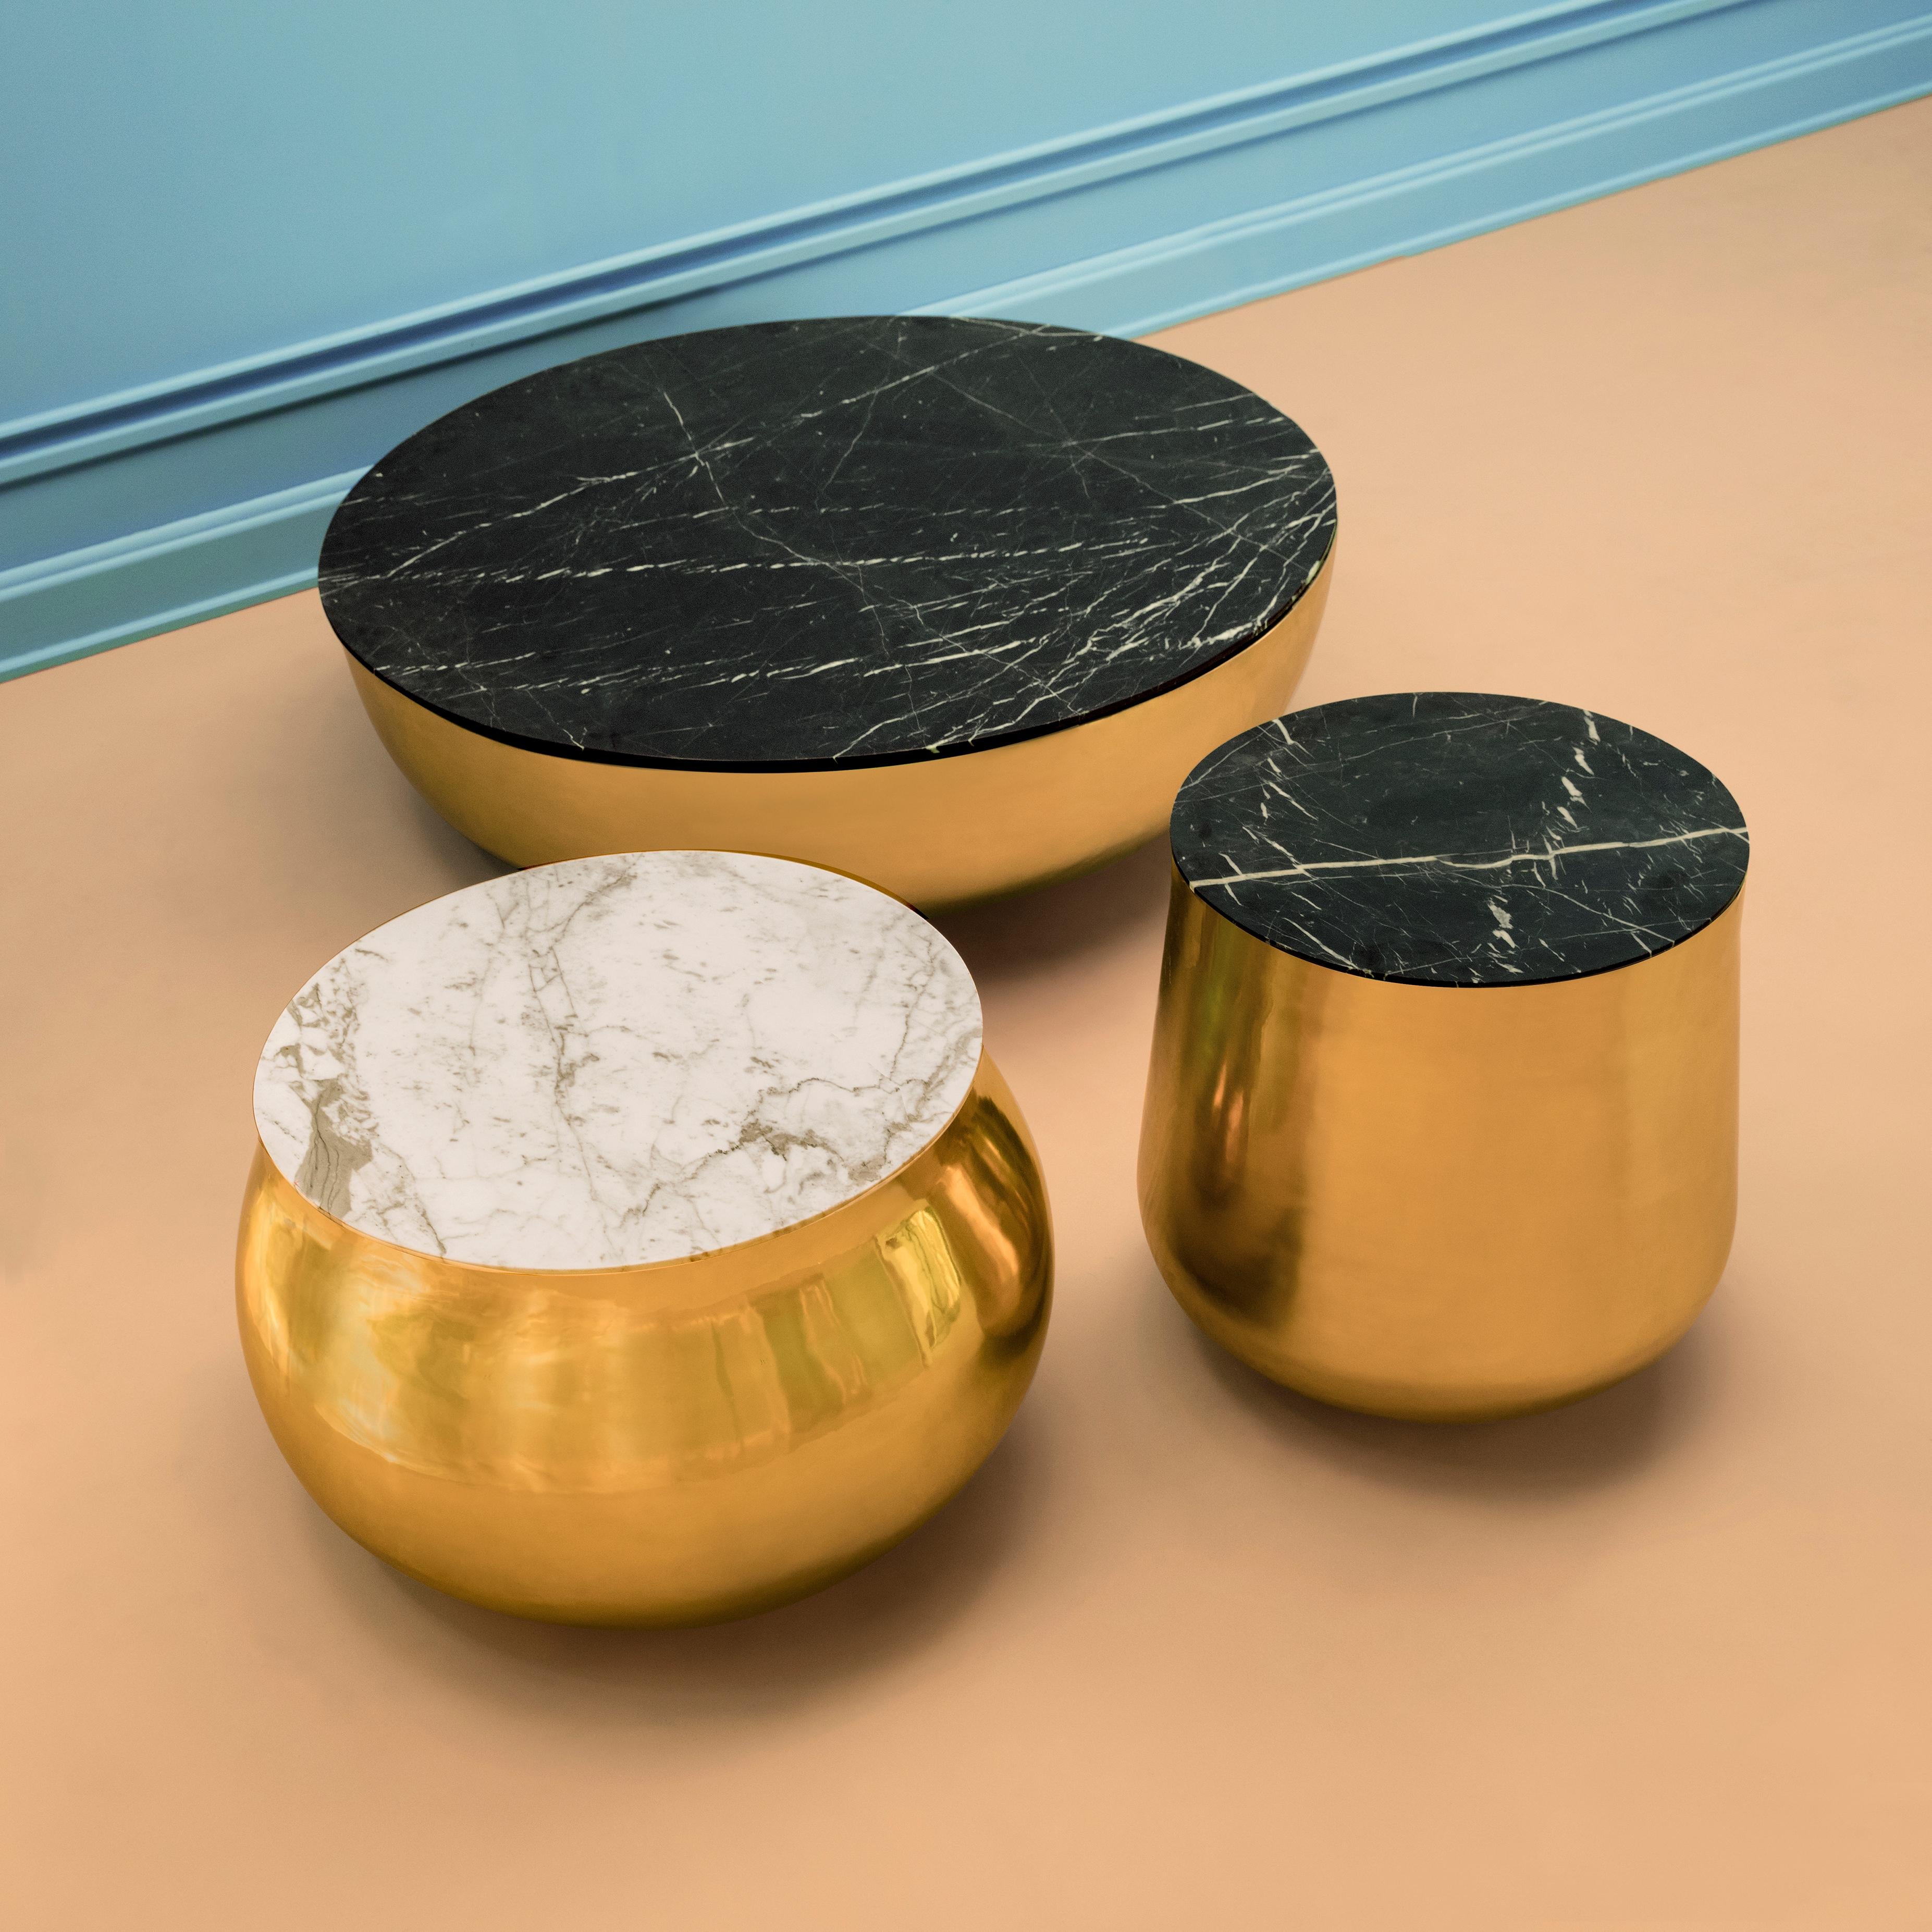 Terra Bass Coffee Table in Brass with Black Marquina Marble Top by Dario Contessotto is large circular coffee table in brass with an Italian marble top in black or white by Scarlet Splendour.

Terra, the beautiful collection inspired by the Indian